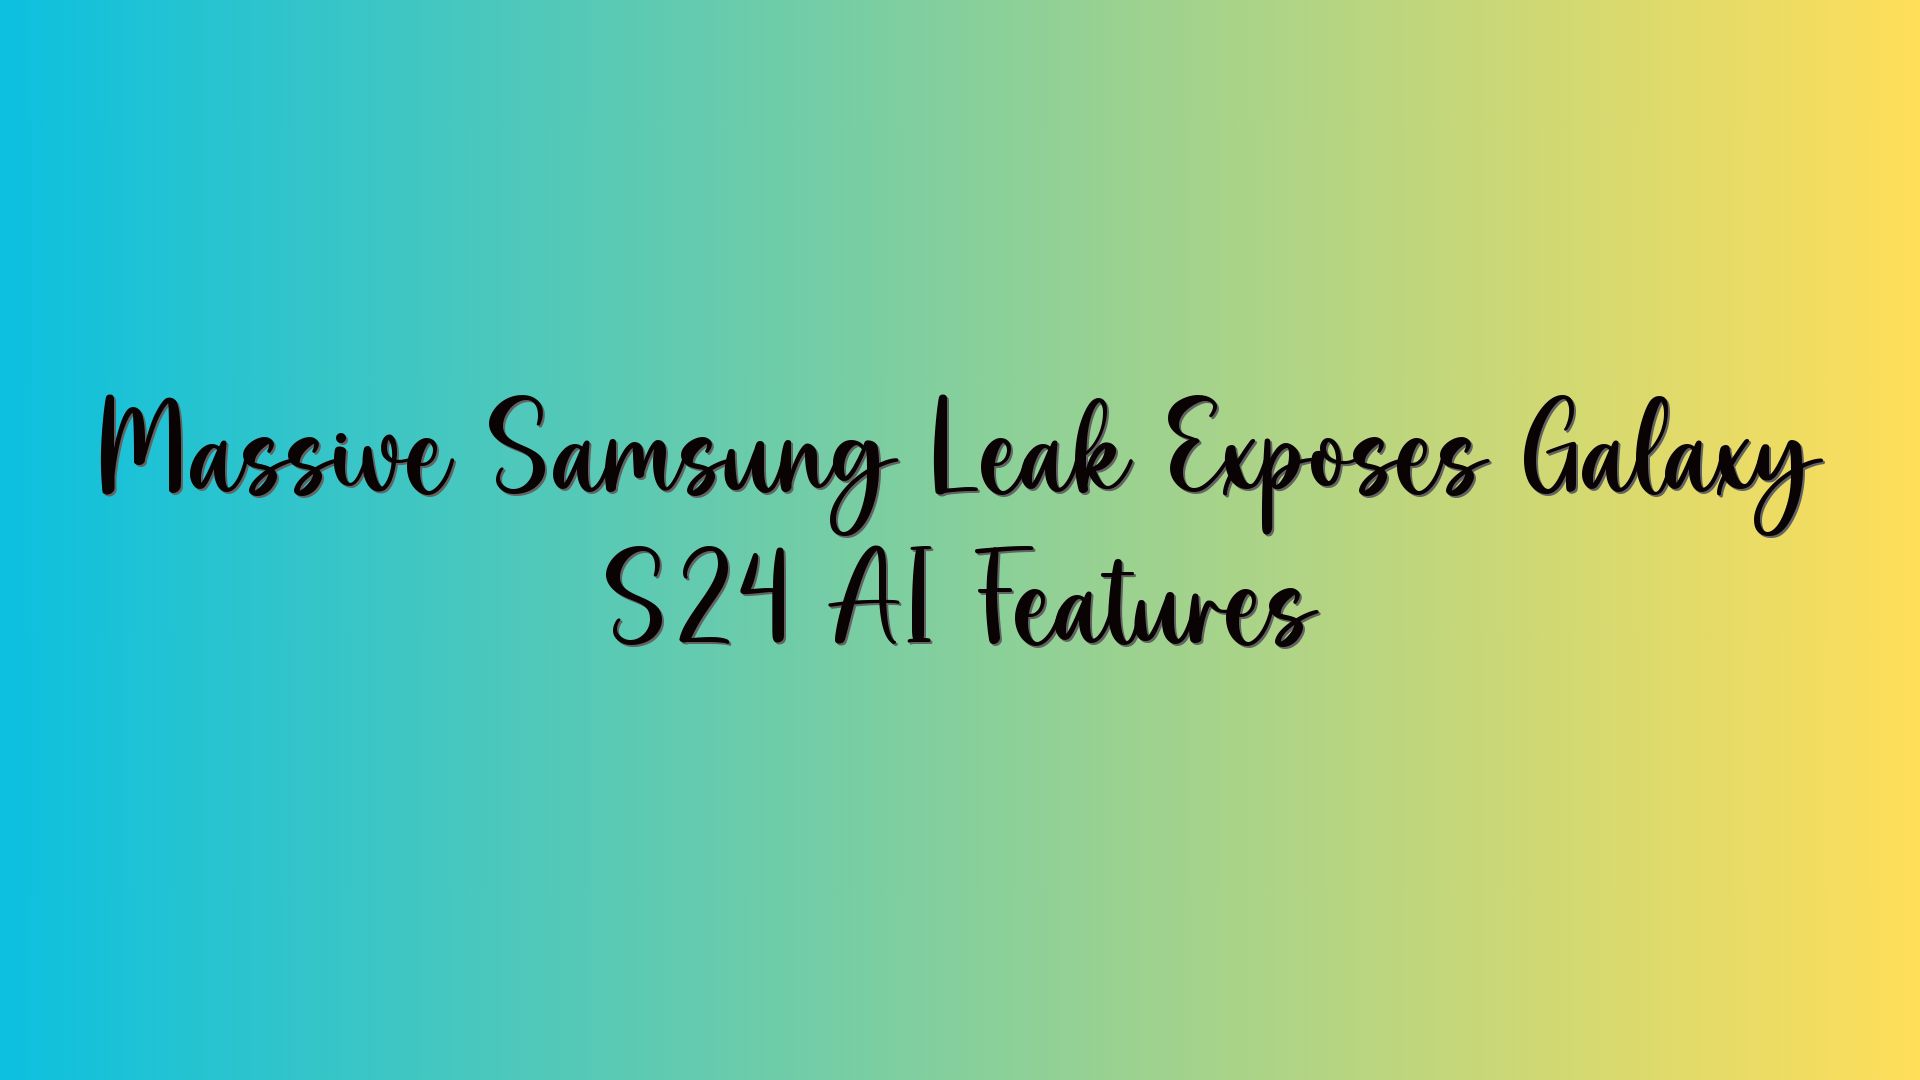 Massive Samsung Leak Exposes Galaxy S24 AI Features